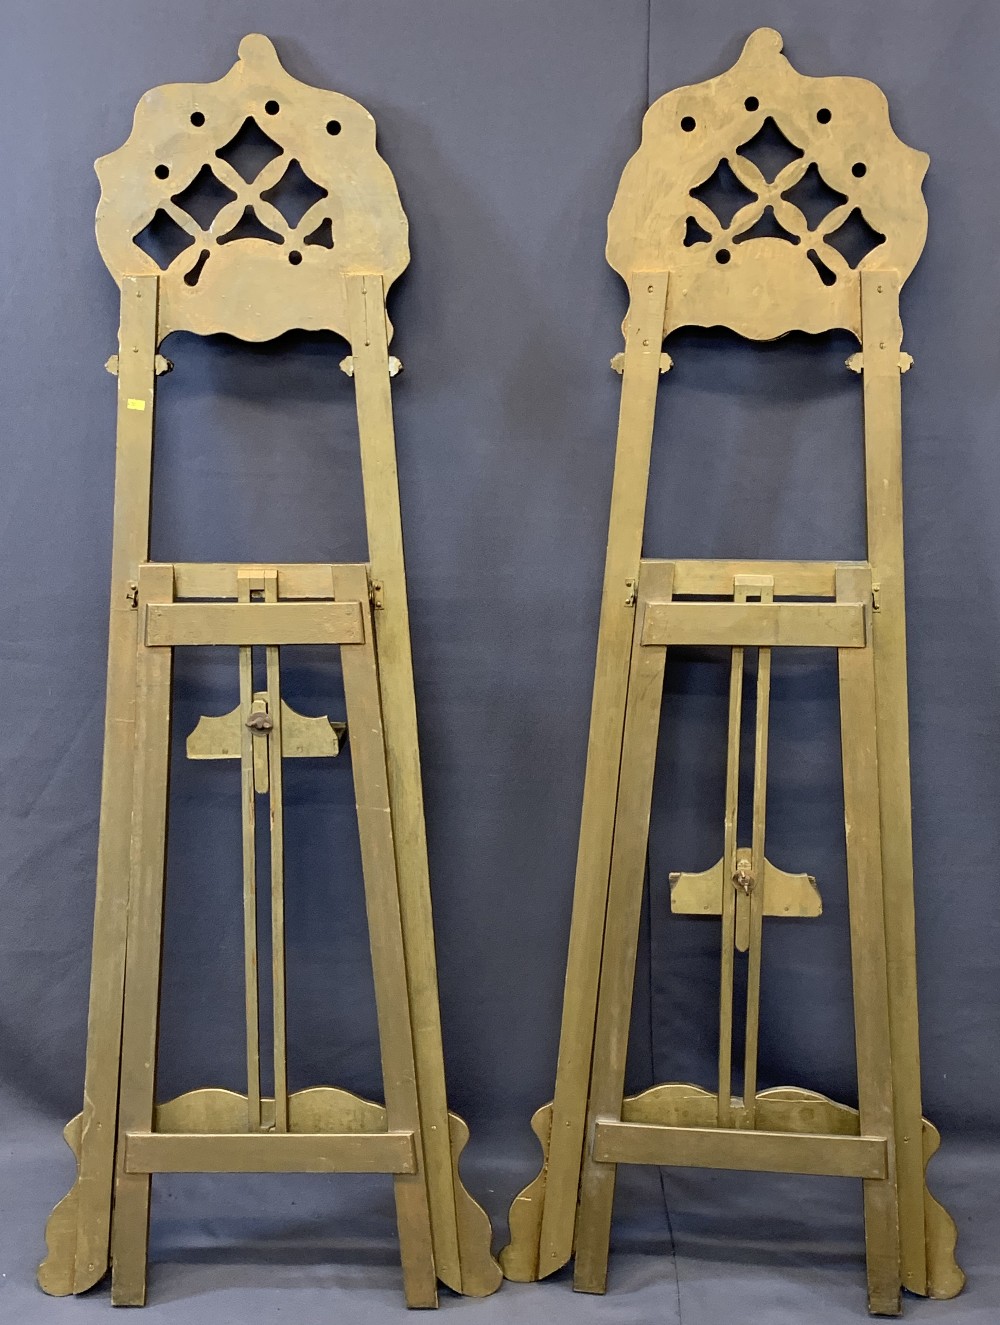 TWO LARGE VINTAGE GILT DECORATED EASEL STANDS having lattice work and applied mouldings with - Image 2 of 2